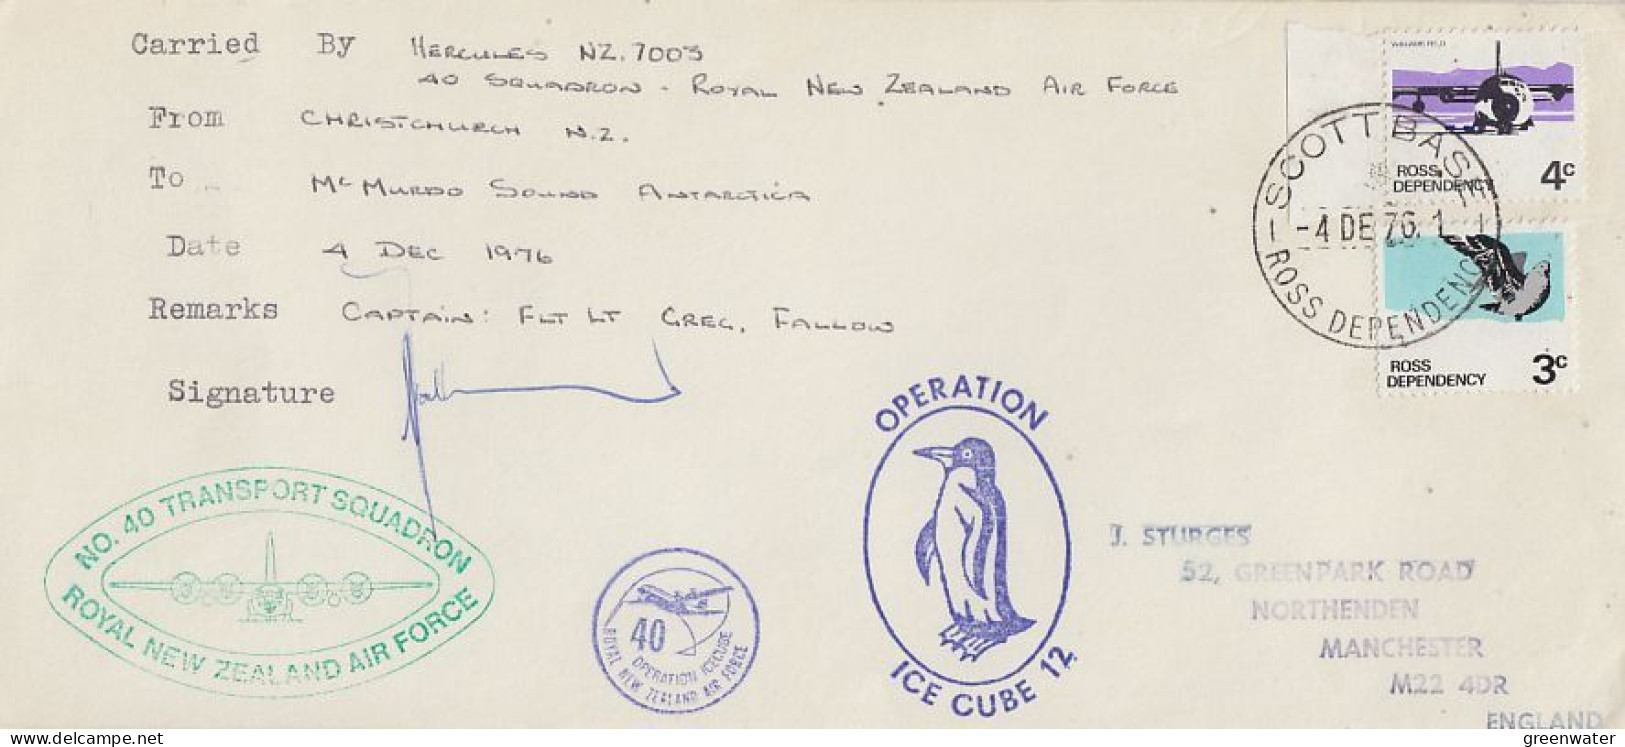 Ross Dependency Antarctic Flight From Christchurch To McMurdo 4 DEC 1976  (RO200) - Covers & Documents